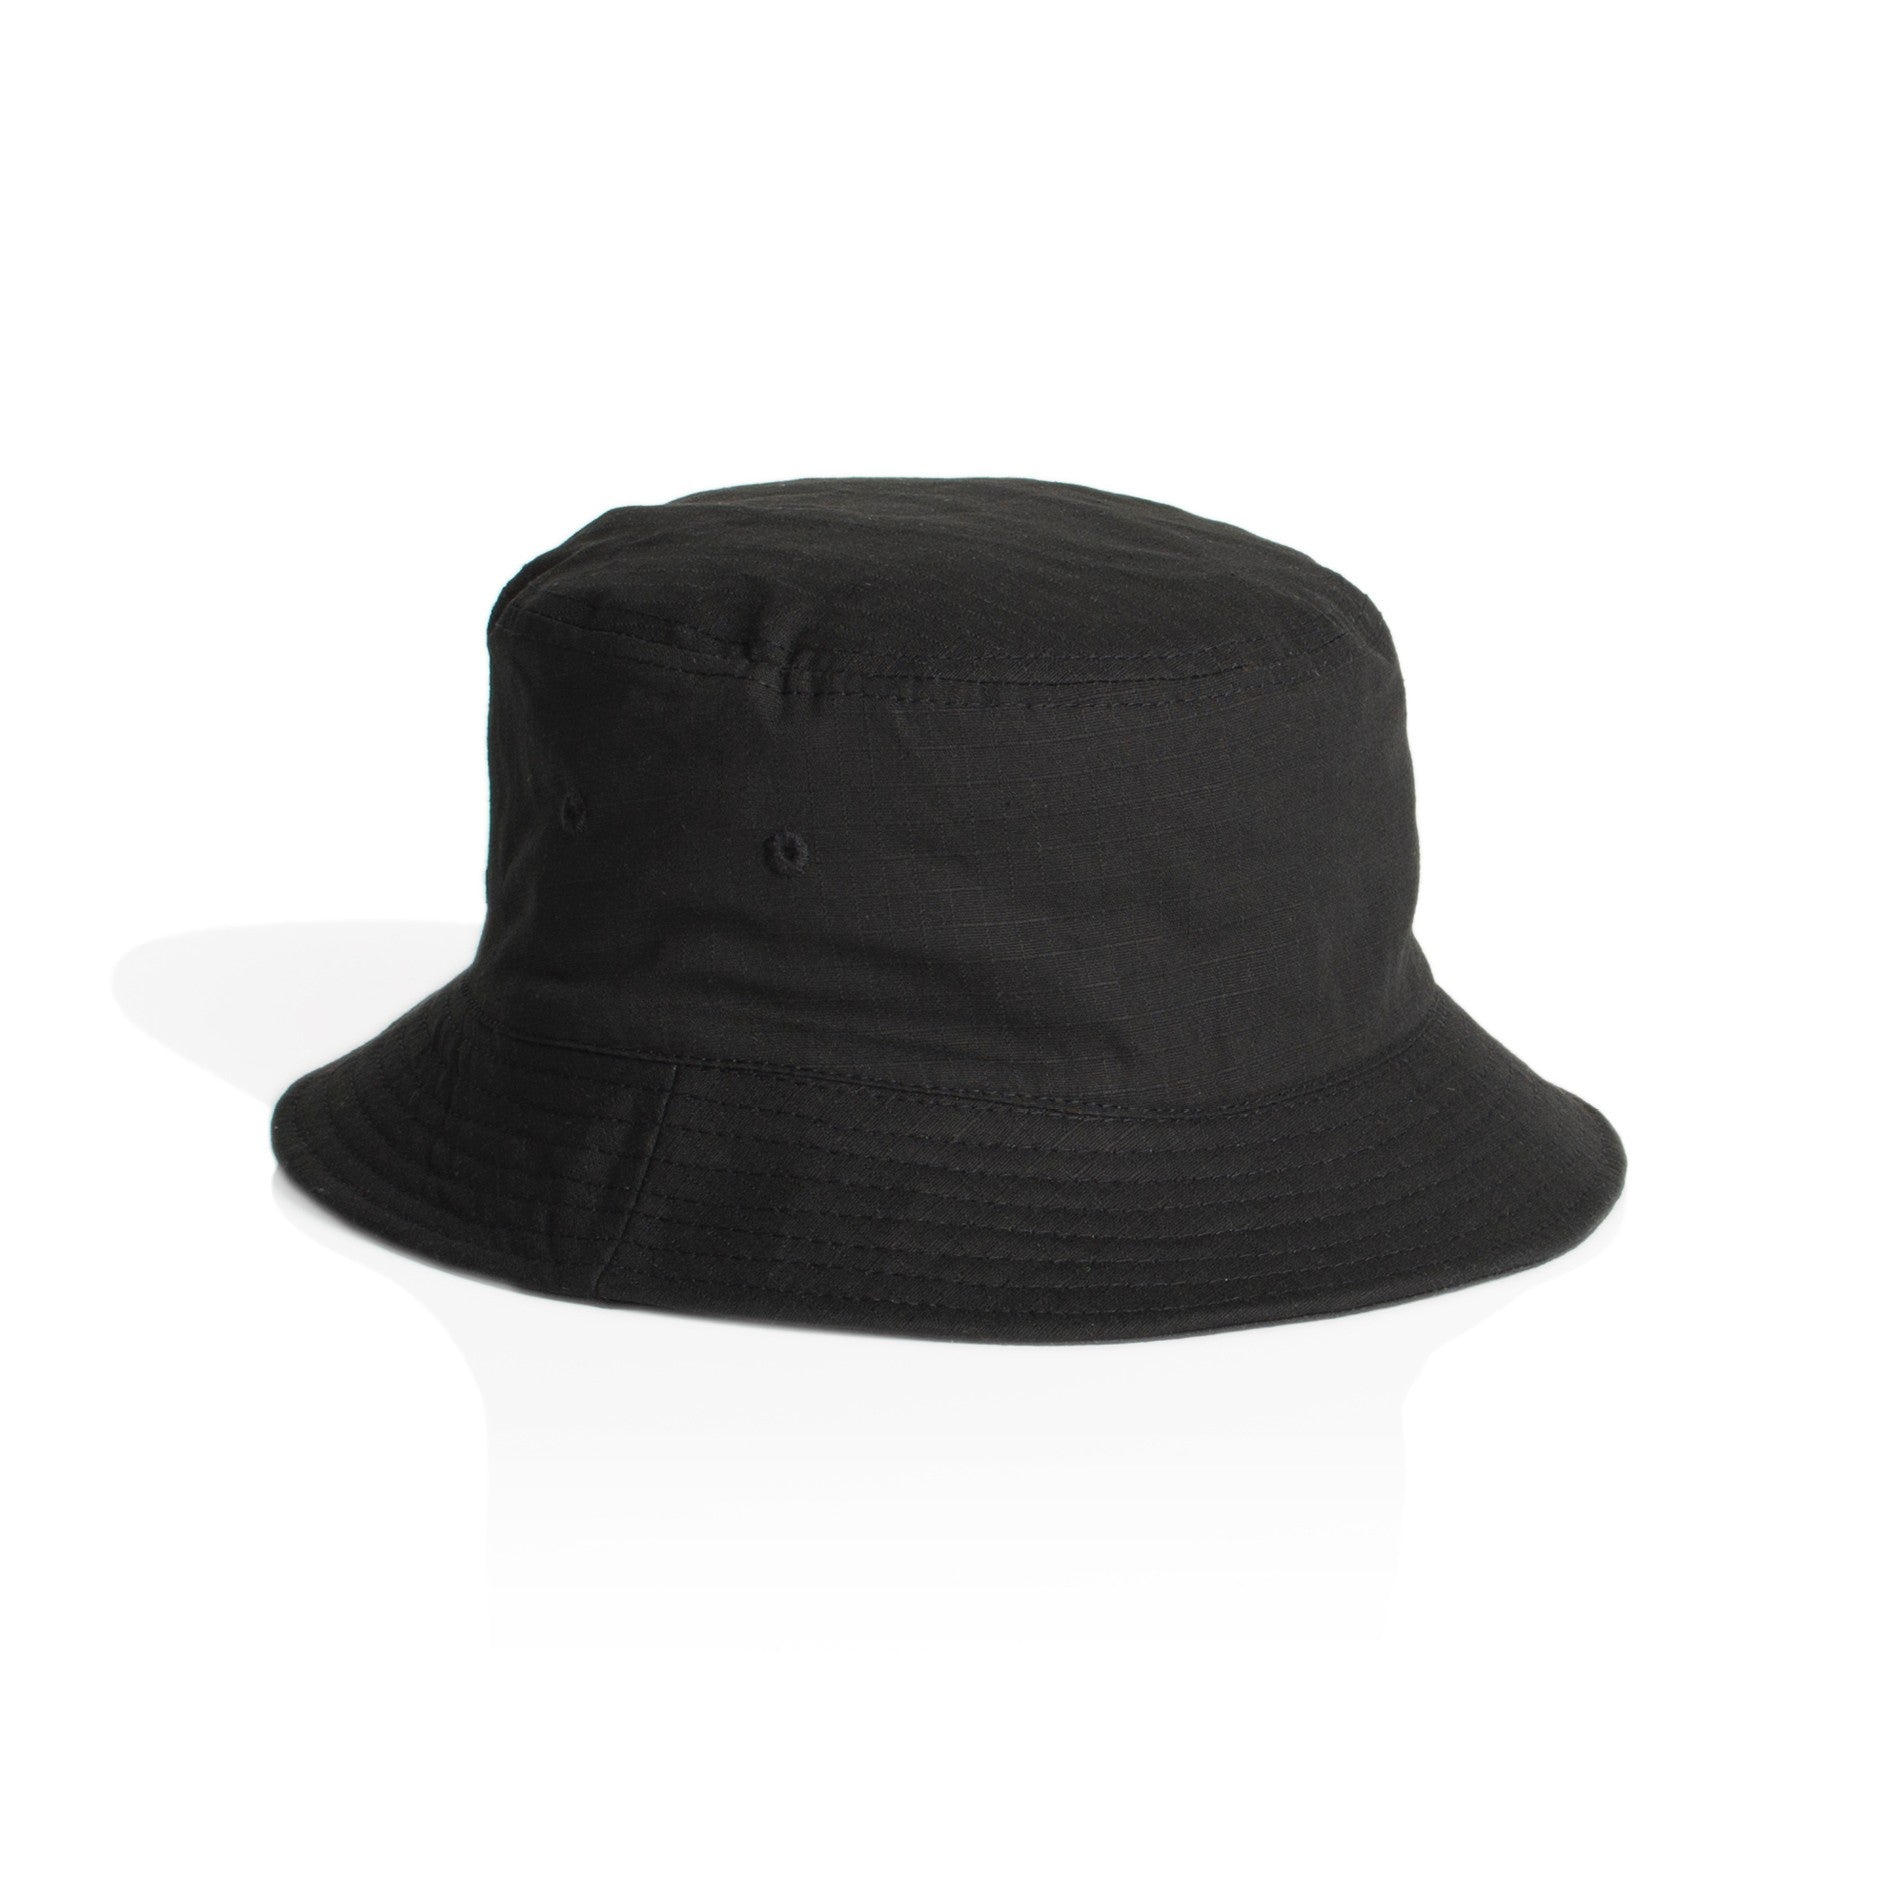 Unisex bucket hat, embroidered or printed, quantities of 5,10,20,50,10 ...